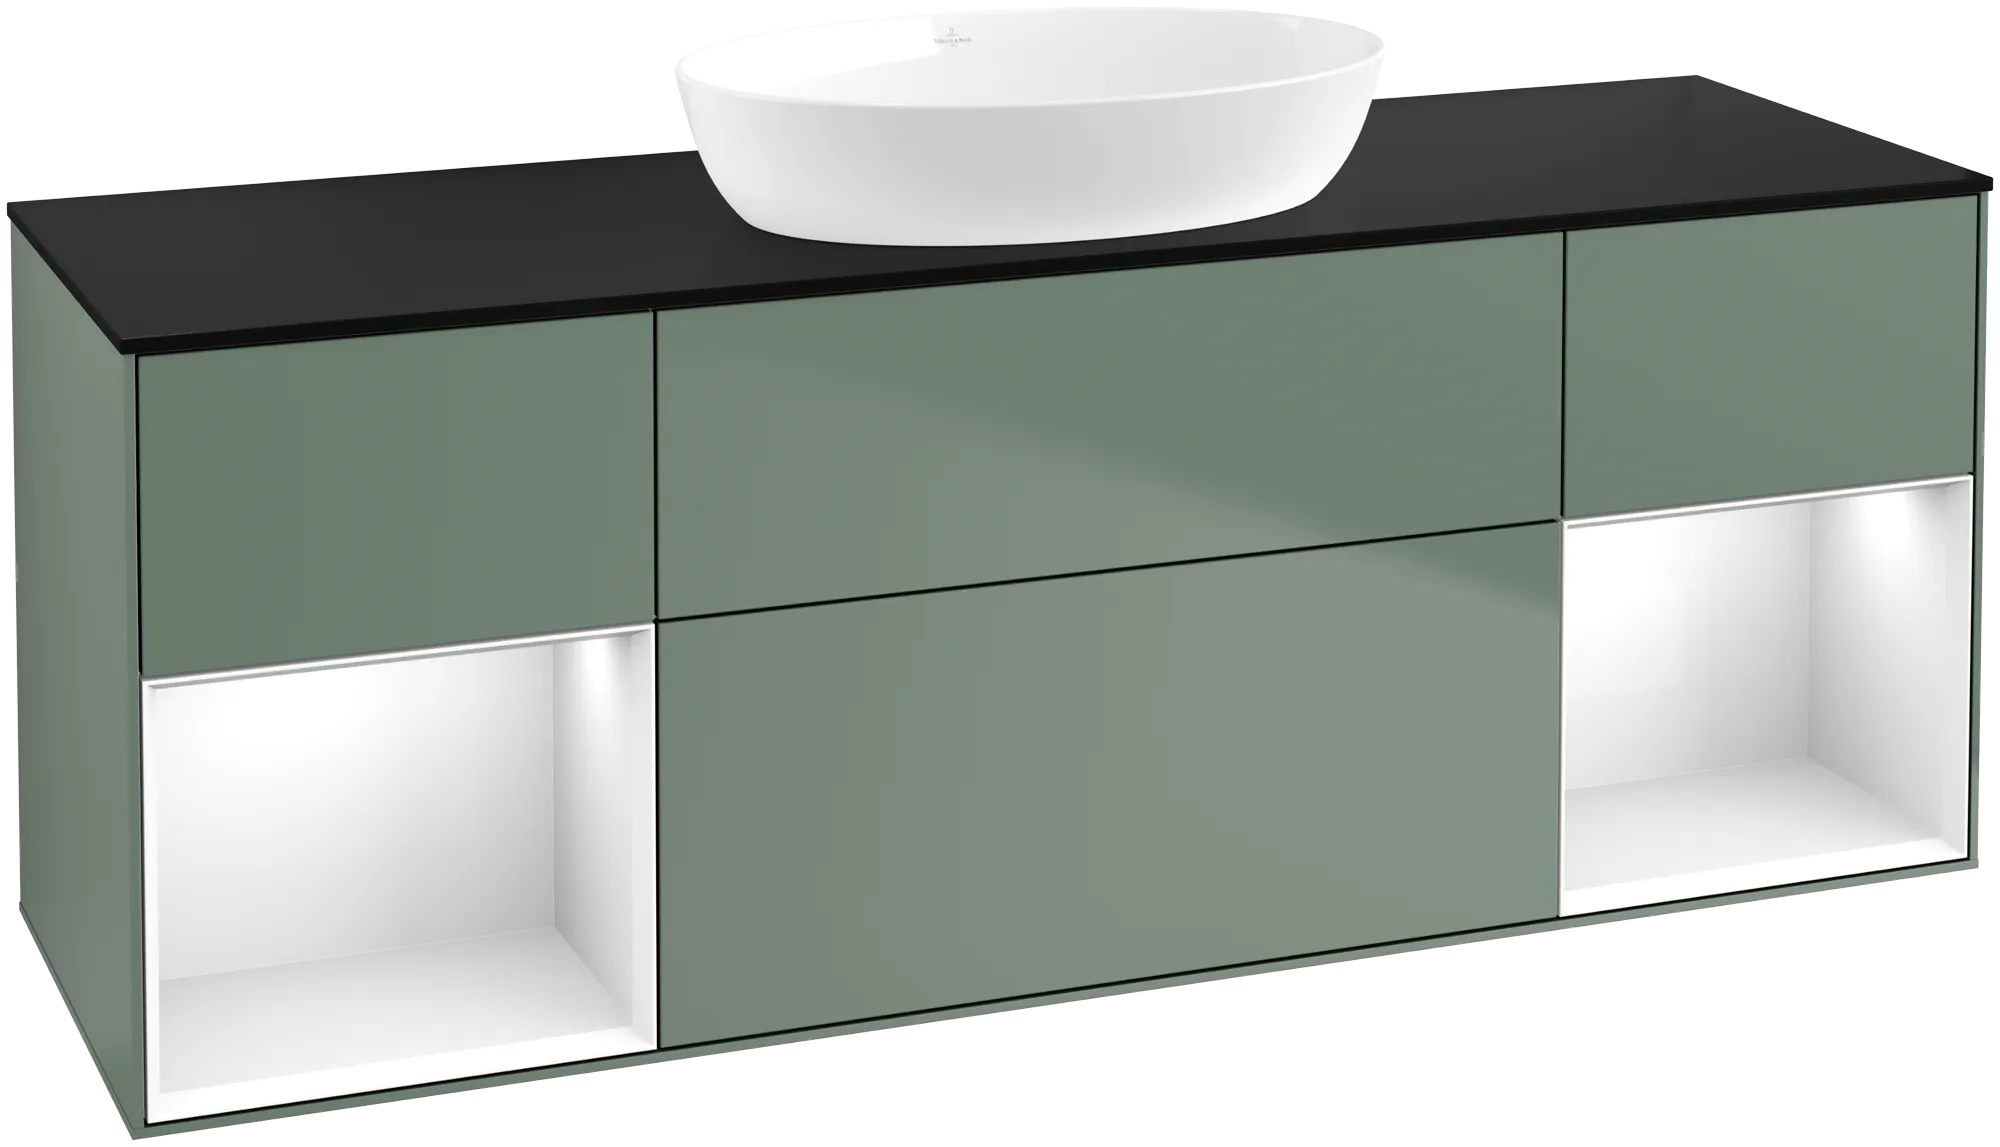 Picture of VILLEROY BOCH Finion Vanity unit, with lighting, 4 pull-out compartments, 1600 x 603 x 501 mm, Olive Matt Lacquer / Glossy White Lacquer / Glass Black Matt #GD02GFGM